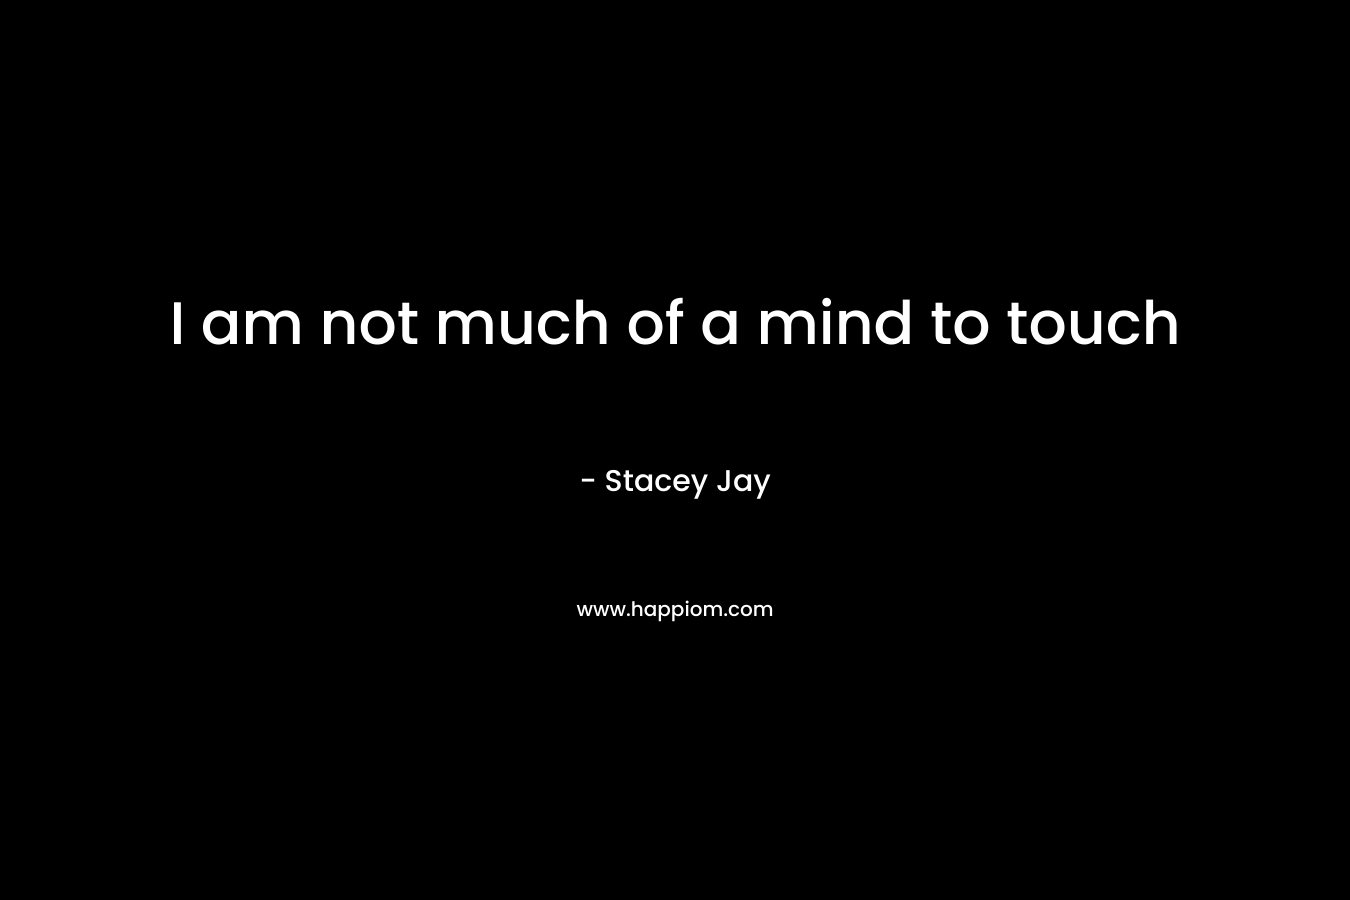 I am not much of a mind to touch